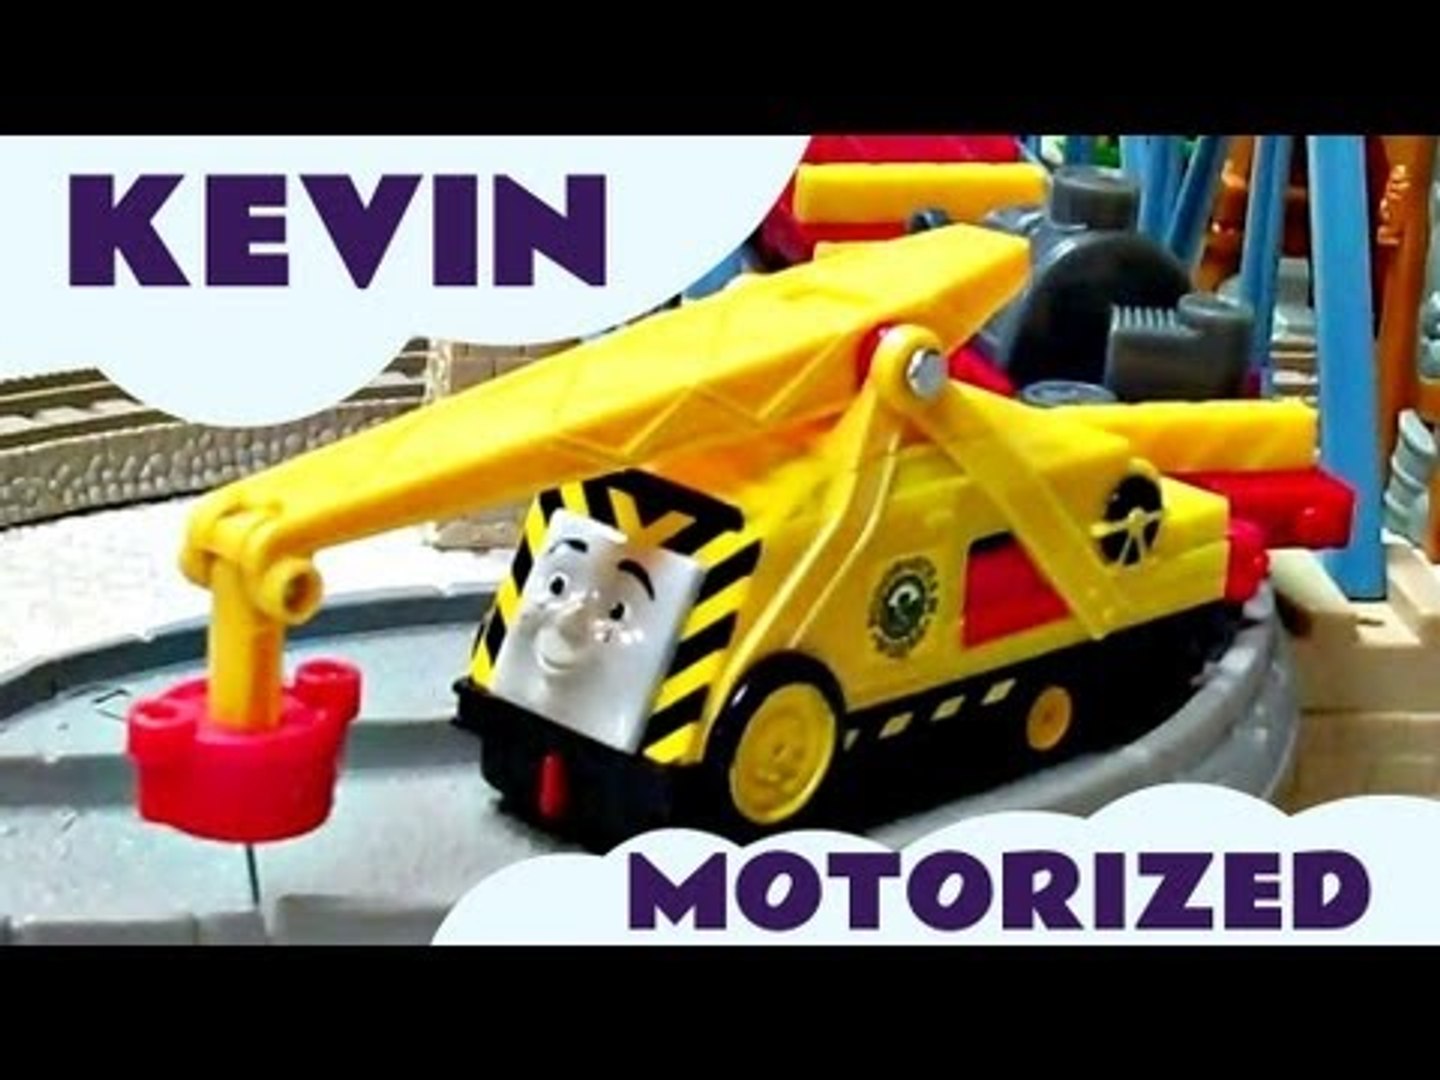 Thomas & Friends Trackmaster Kevin Motorized Engine Toy Train 